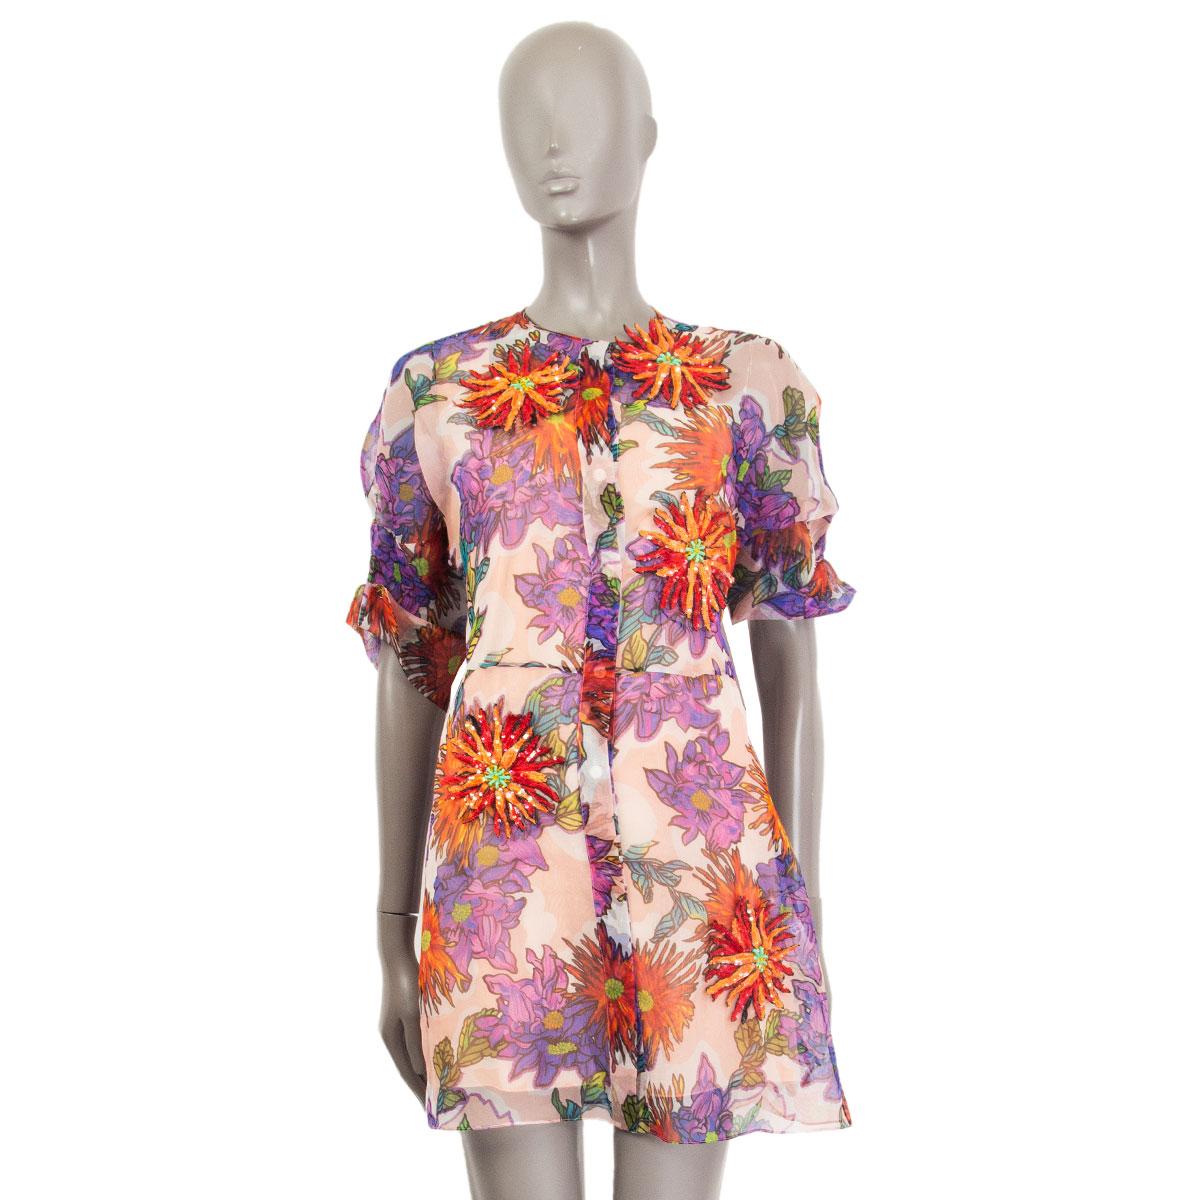 100% authentic Blumarine short-sleeve dress in muticolor floral printed sheer silk (100% Missing Tag). Opens with eight hidden buttons at front and comes with an apricot colored silk slip dress underneath. Embellished with four red and orange sequin